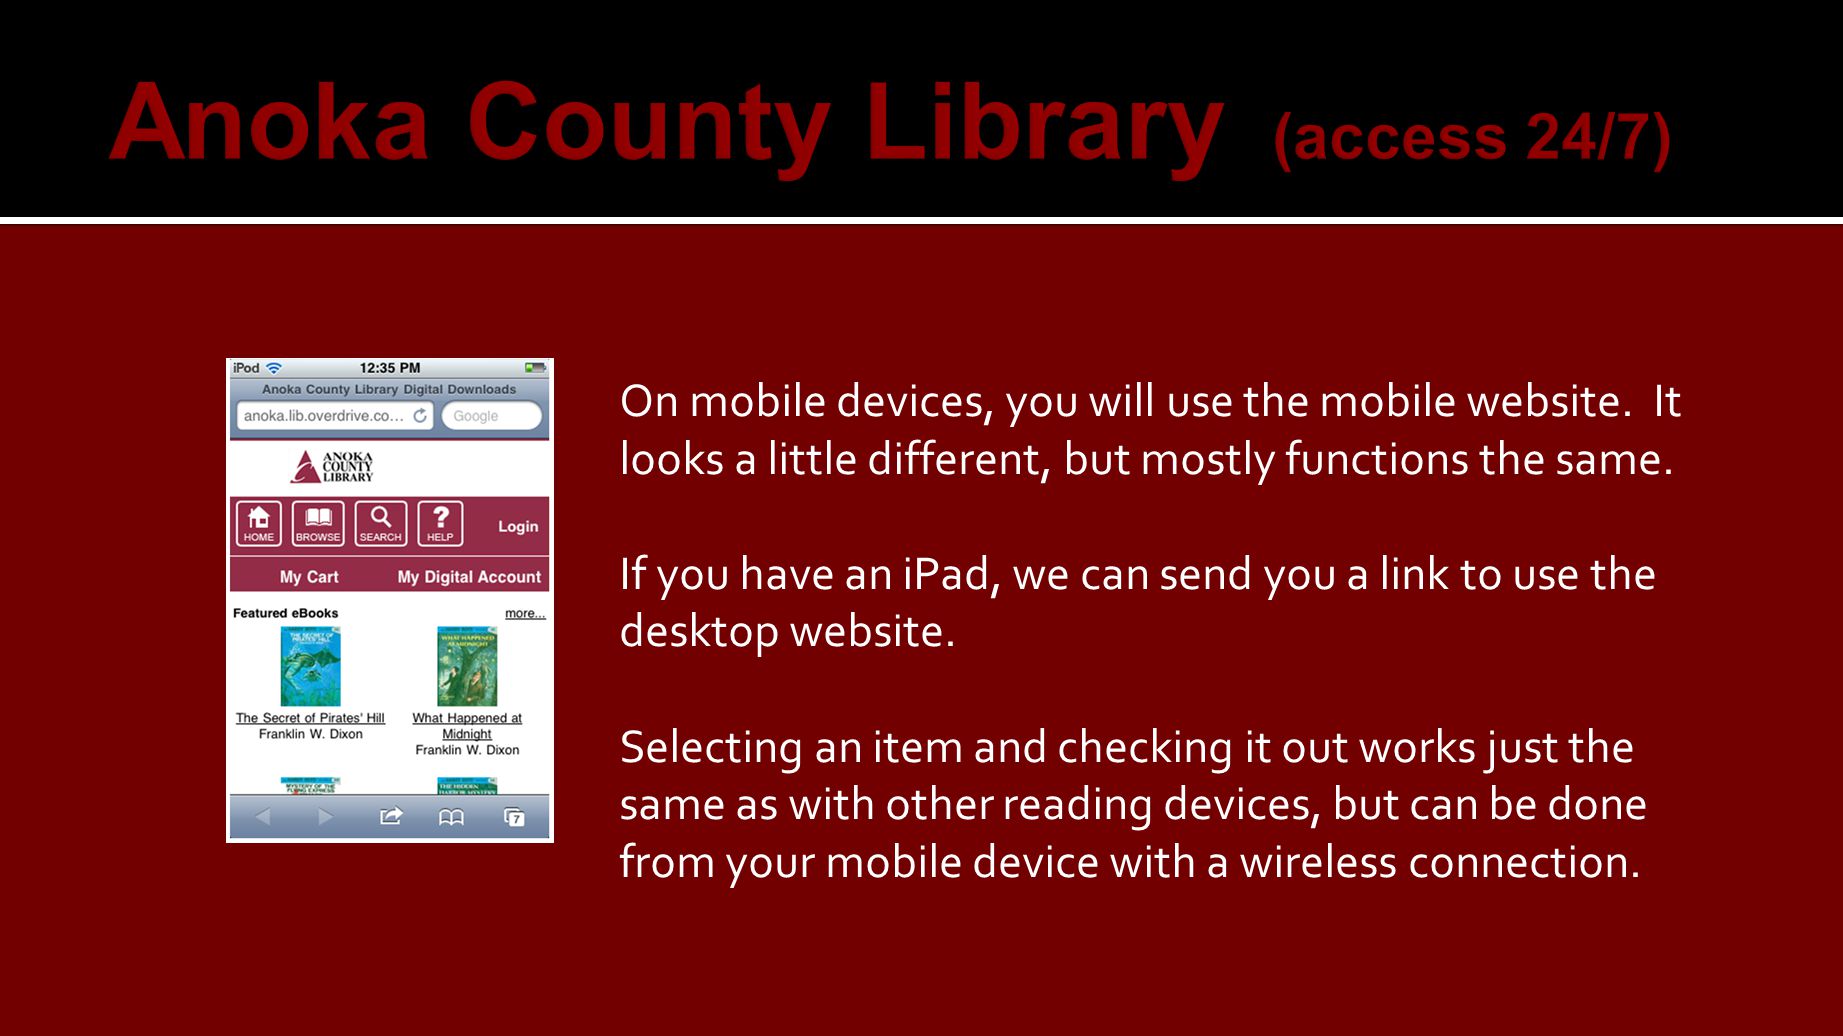 On mobile devices, you will use the mobile website.